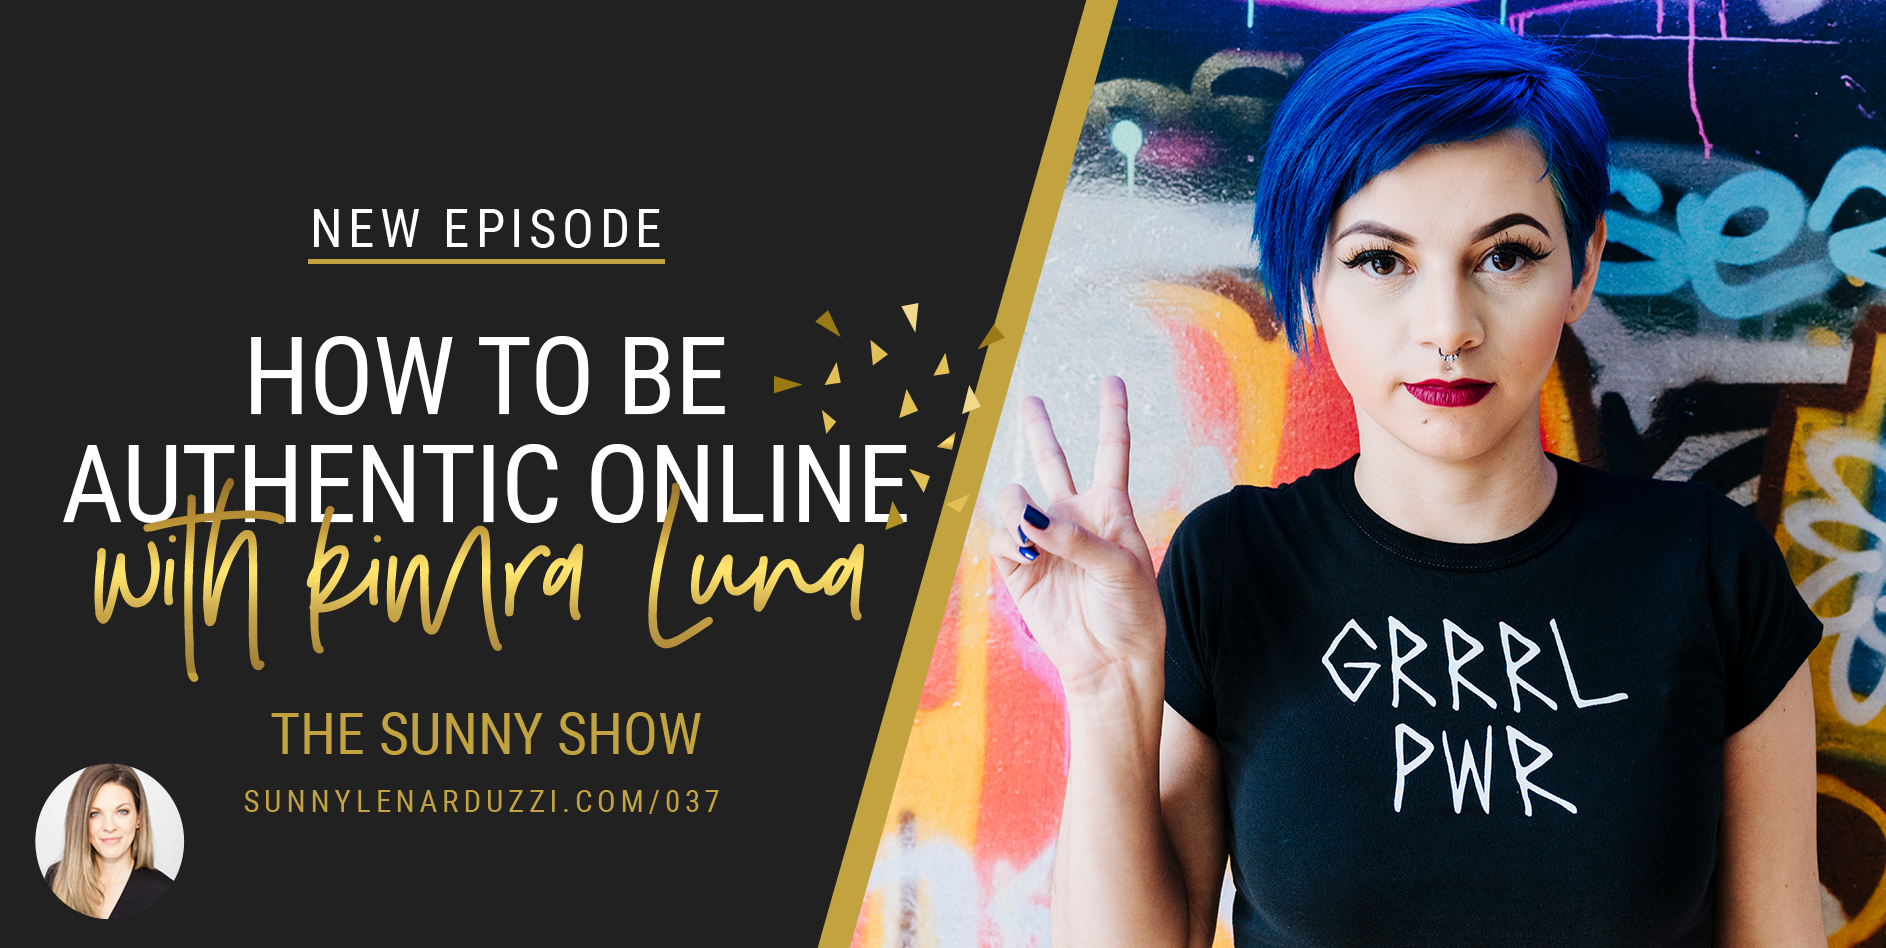 How to Be Authentic Online with Kimra Luna